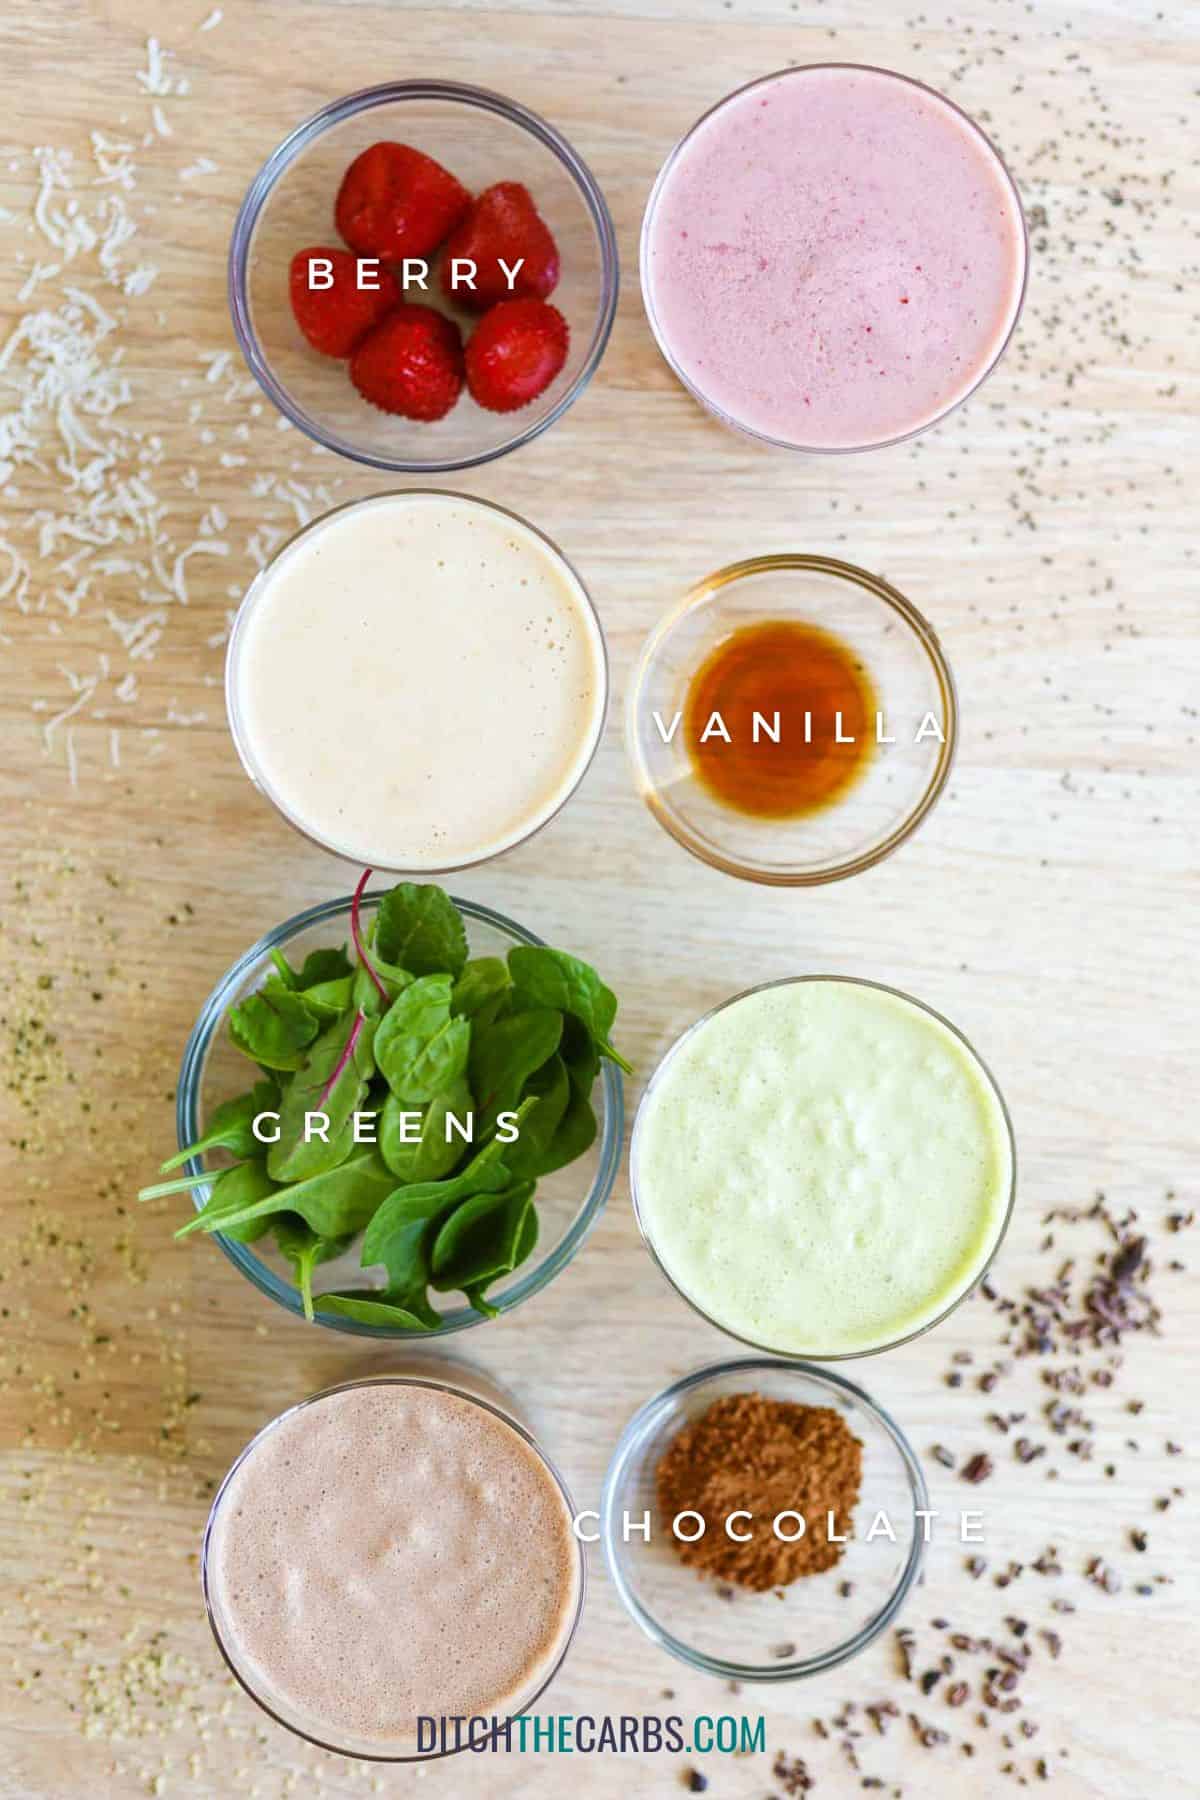 4 variations of low-carb protein shakes in glass cups with a bowl of the variation ingredients next to it. The berry flavor has strawberries. The Vanilla flavor has vanilla extract next to it. The green variation has a handful of baby spinach, and the chocolate version has a tablespoon of cocoa powdered next to it.